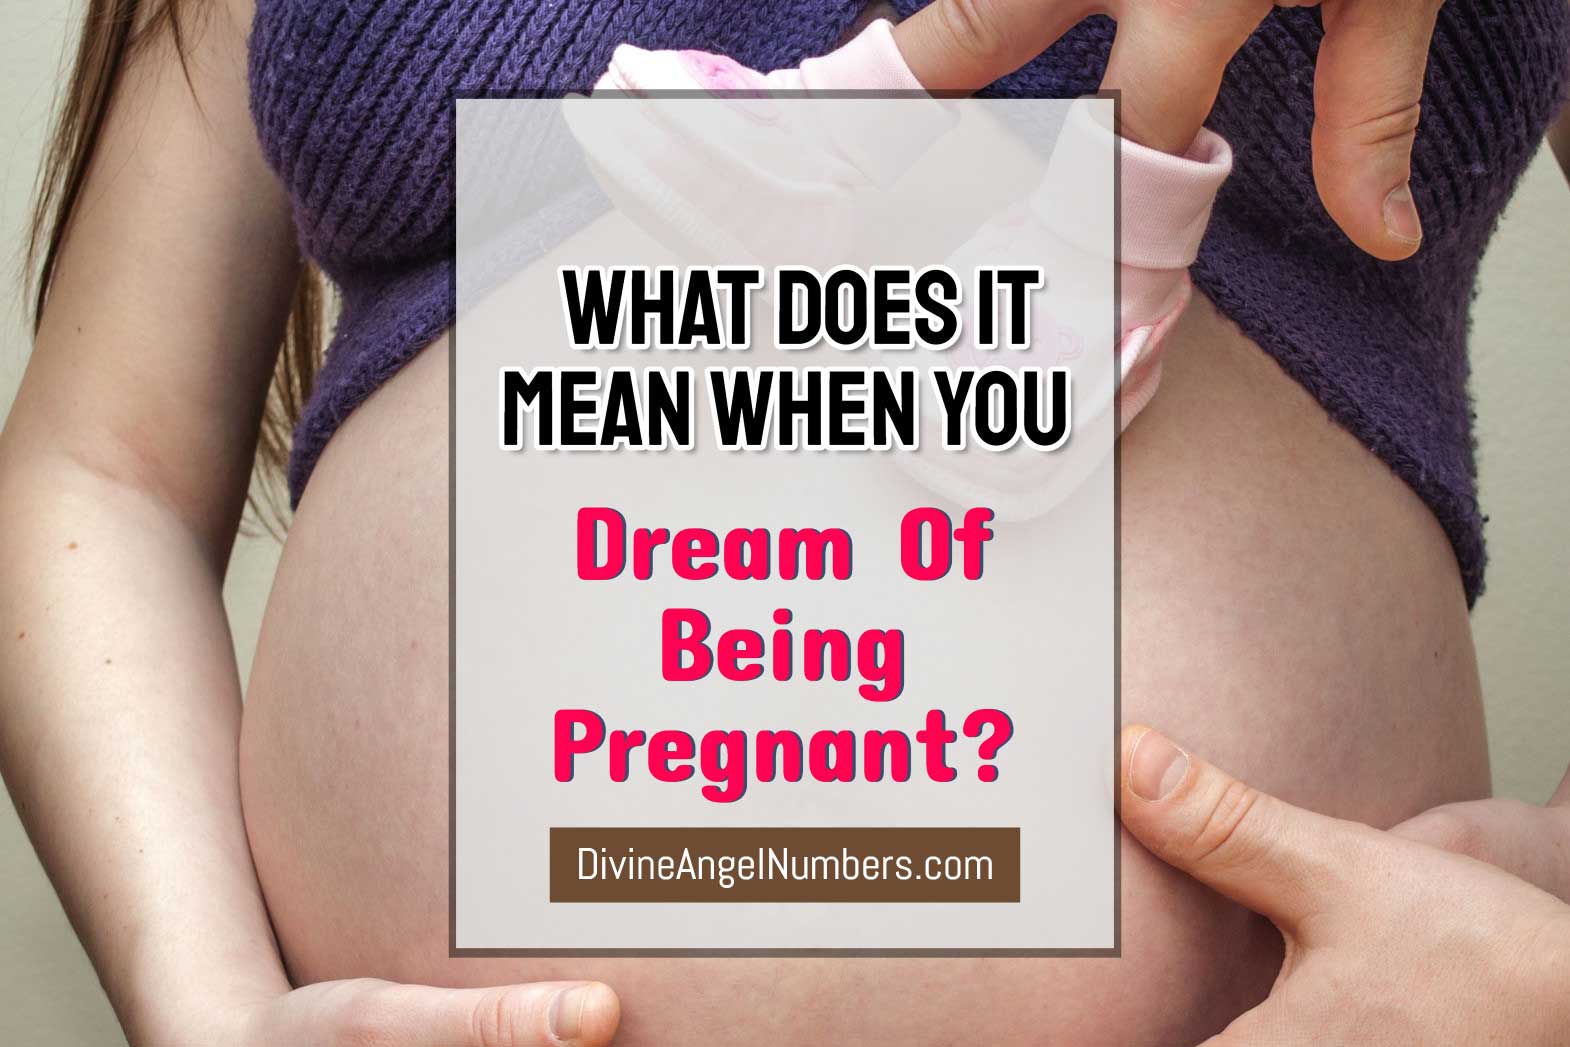 dreaming of being pregnant download free